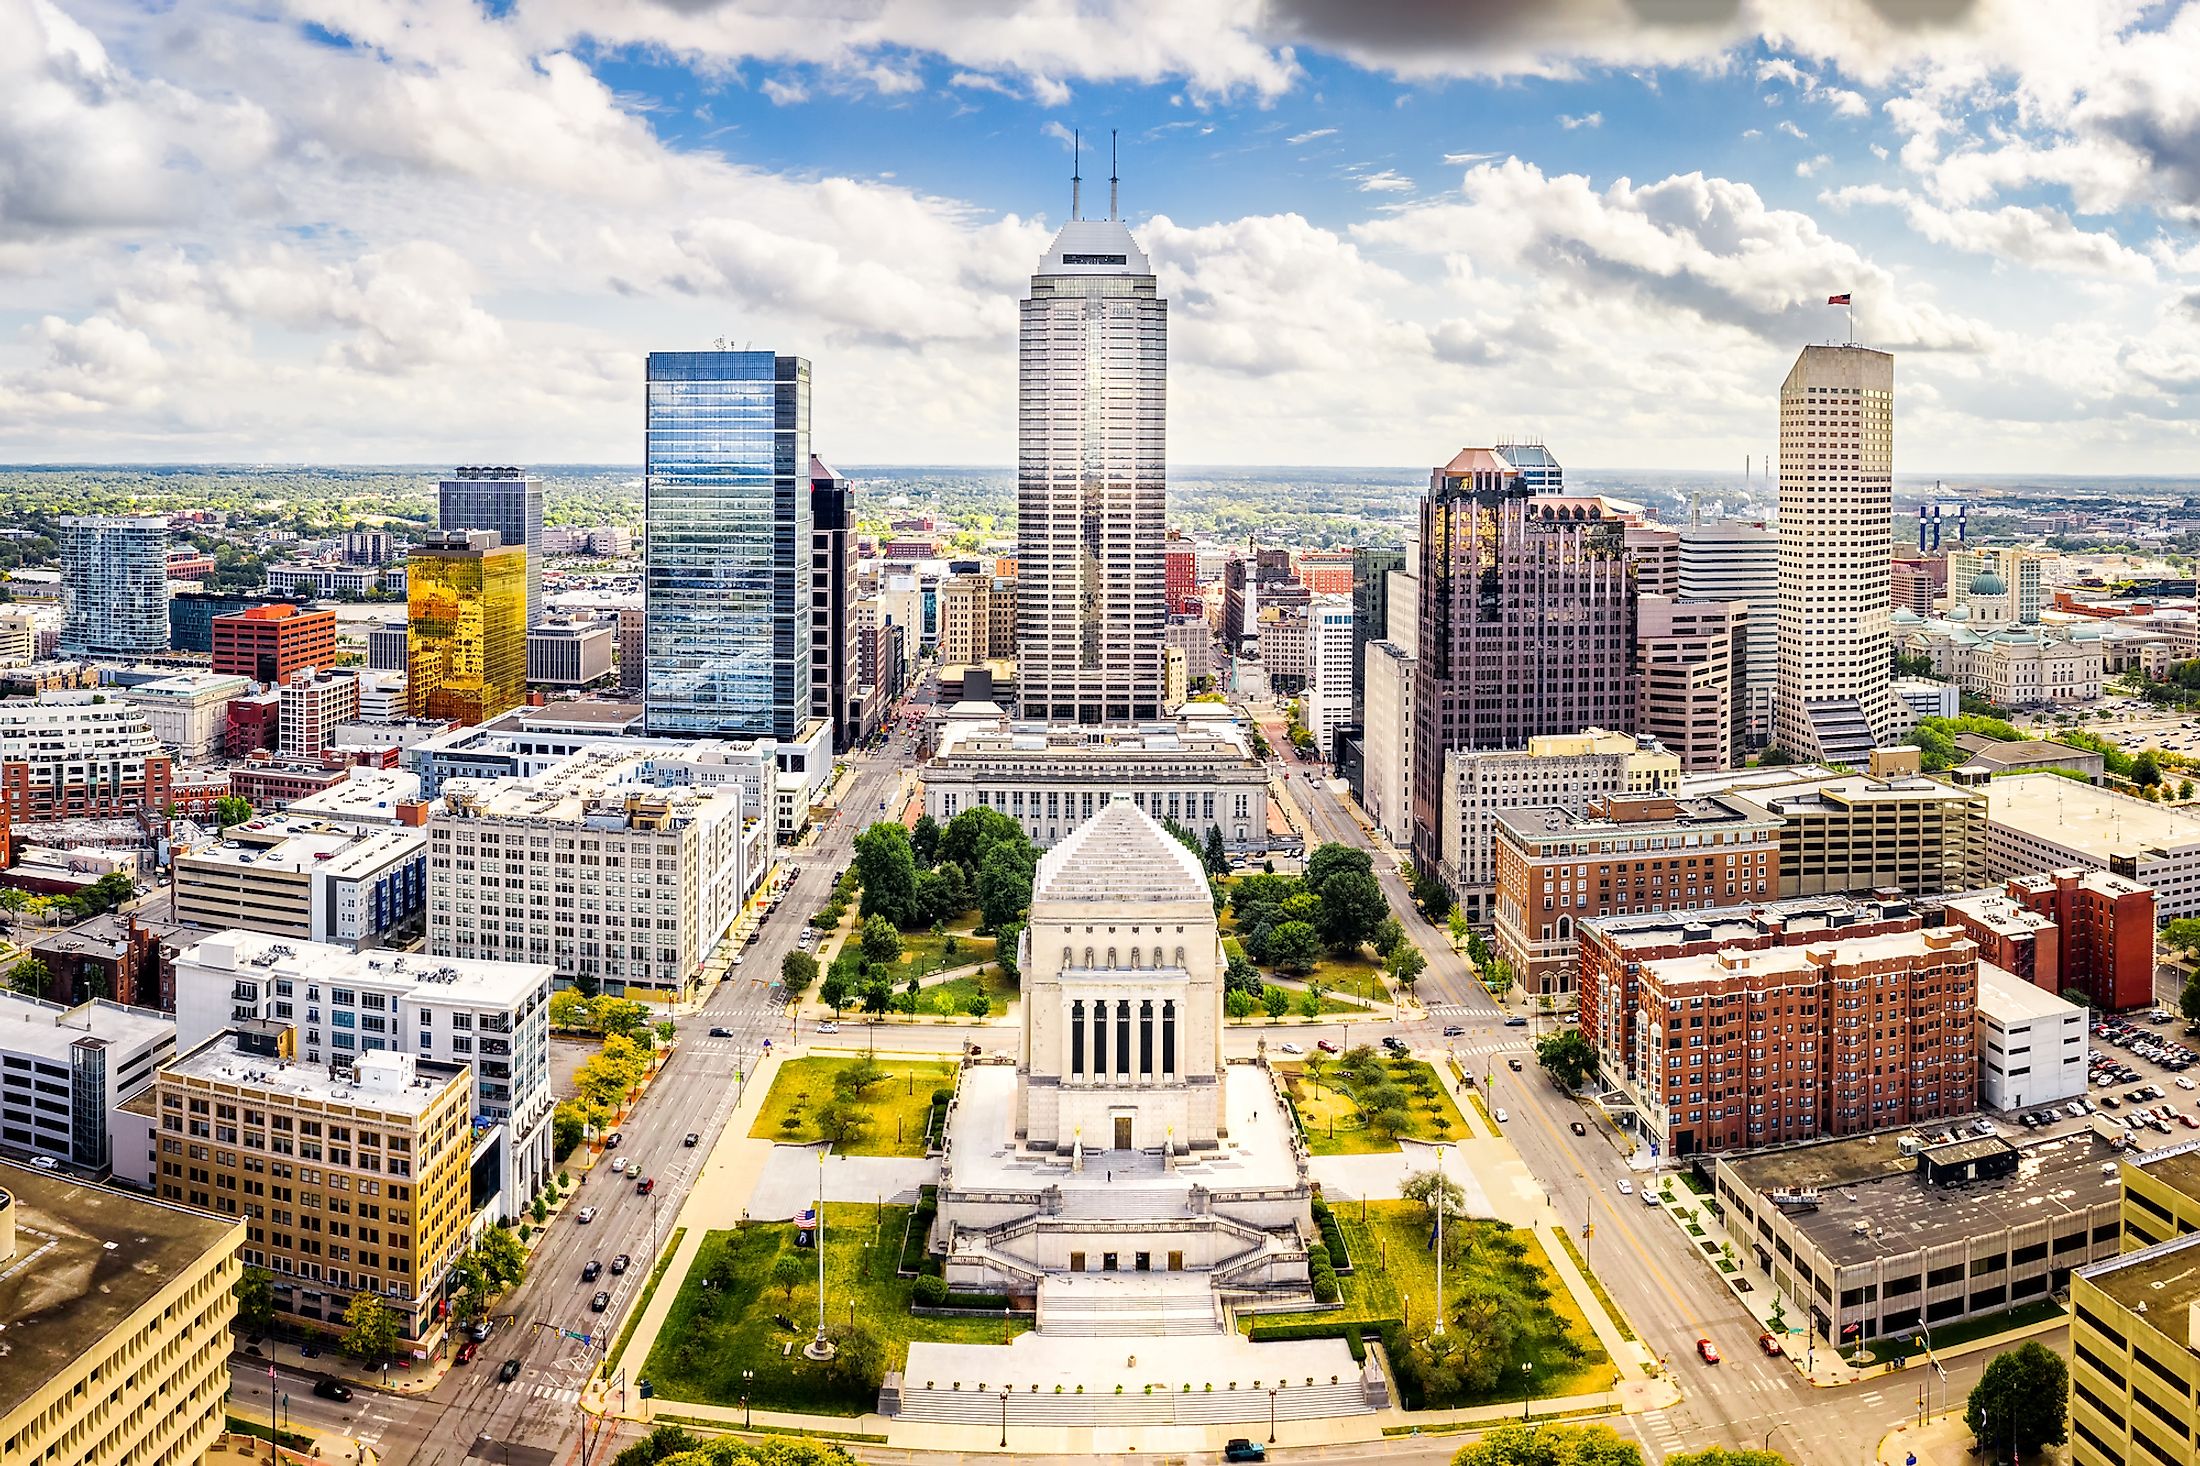 Aerial view of Indianapolis, Indiana skyline.